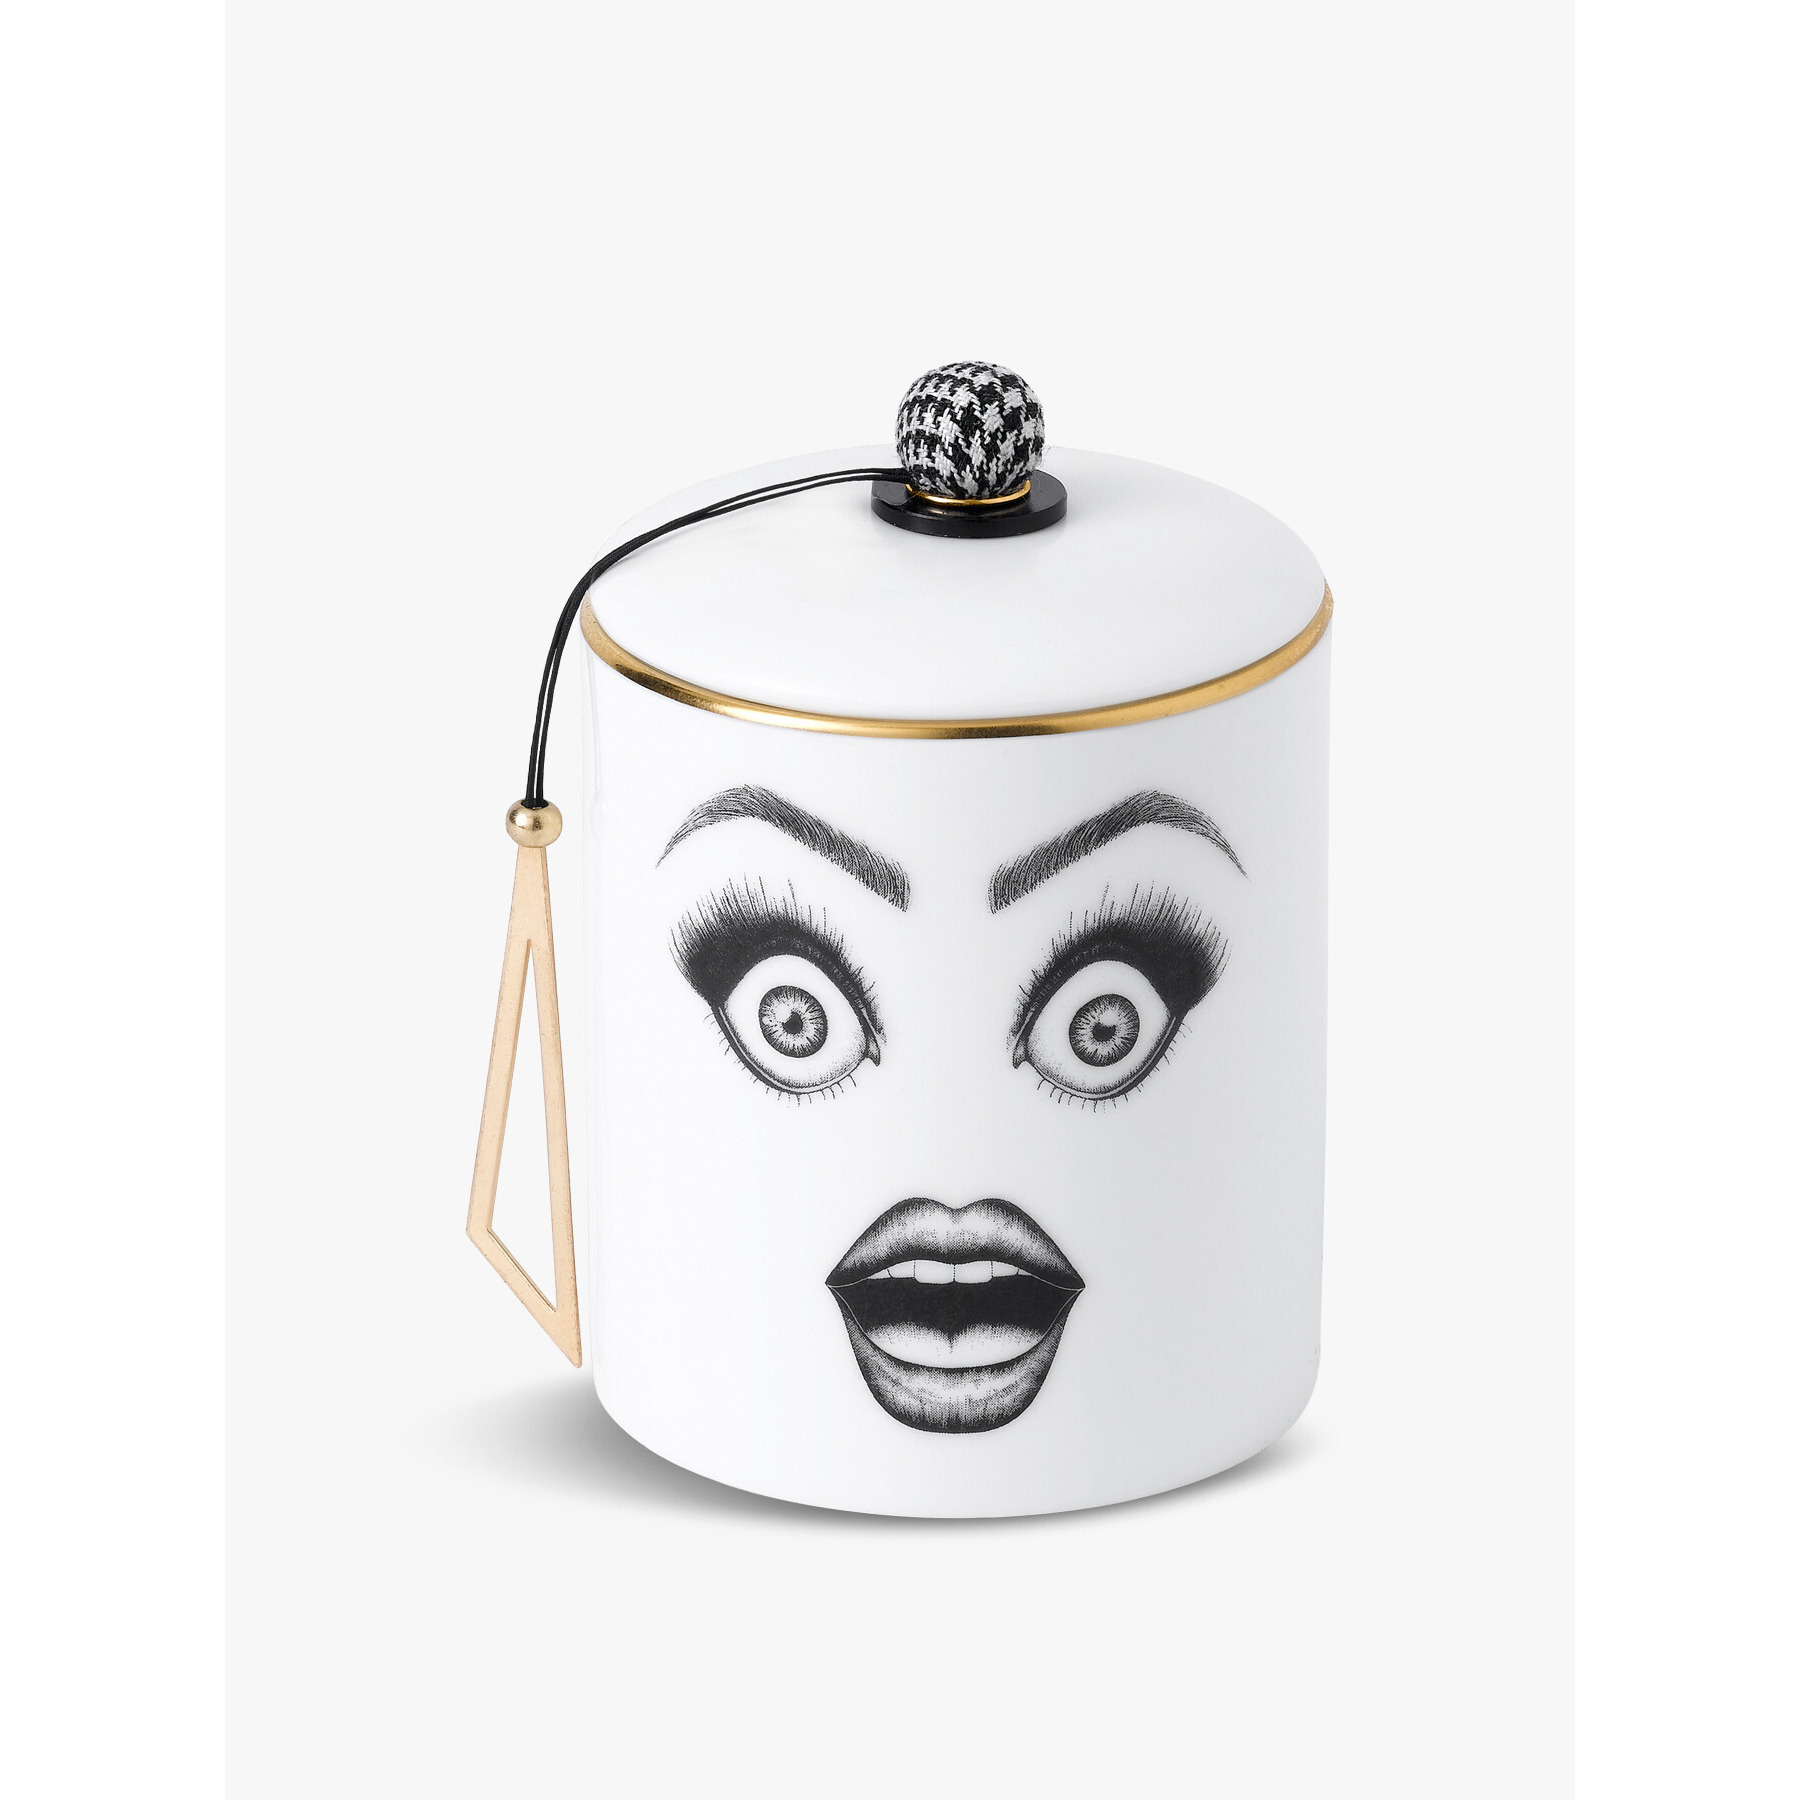 Lauren Dickinson Clarke The Performer Scented Candle With Hat 200g - image 1